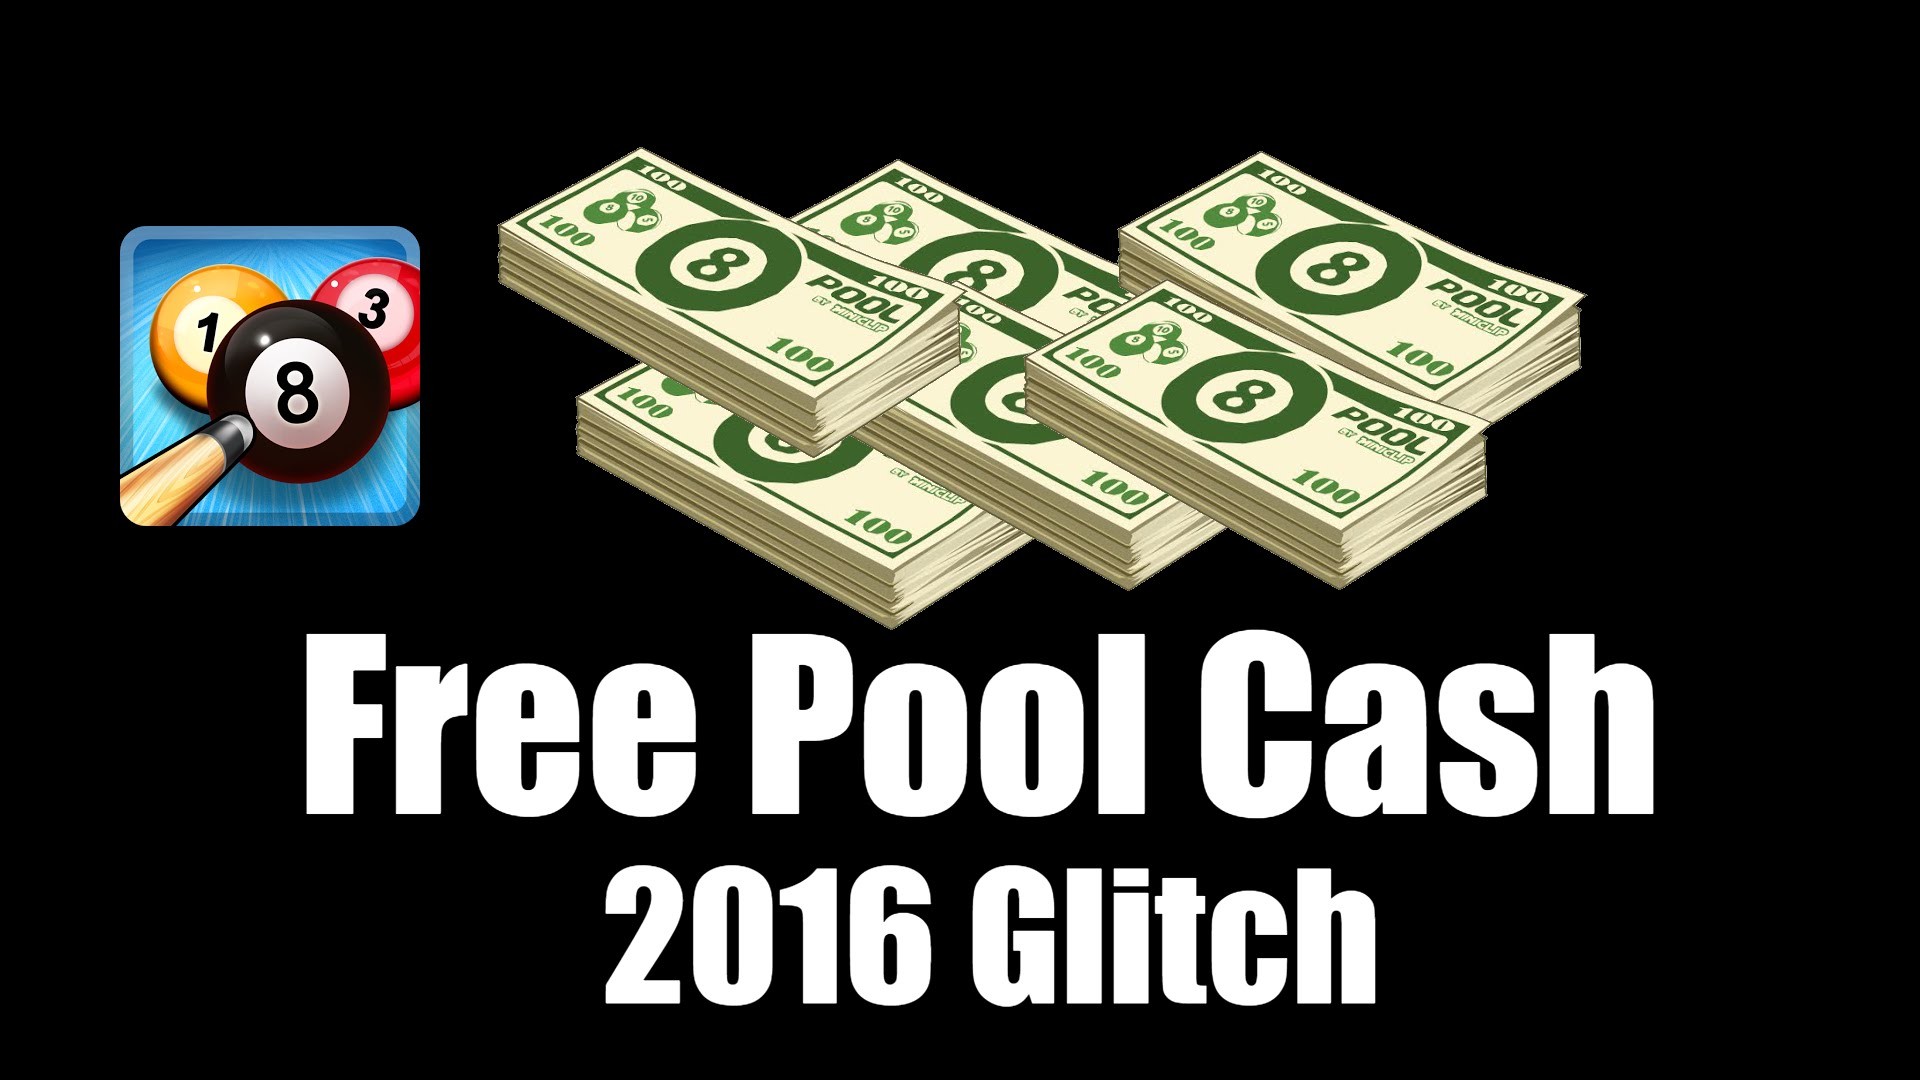 8 Ball Pool Free Unlimited Pool Cash Glitch Aug 2016 Limited v3.7.2 Patched – YouTube